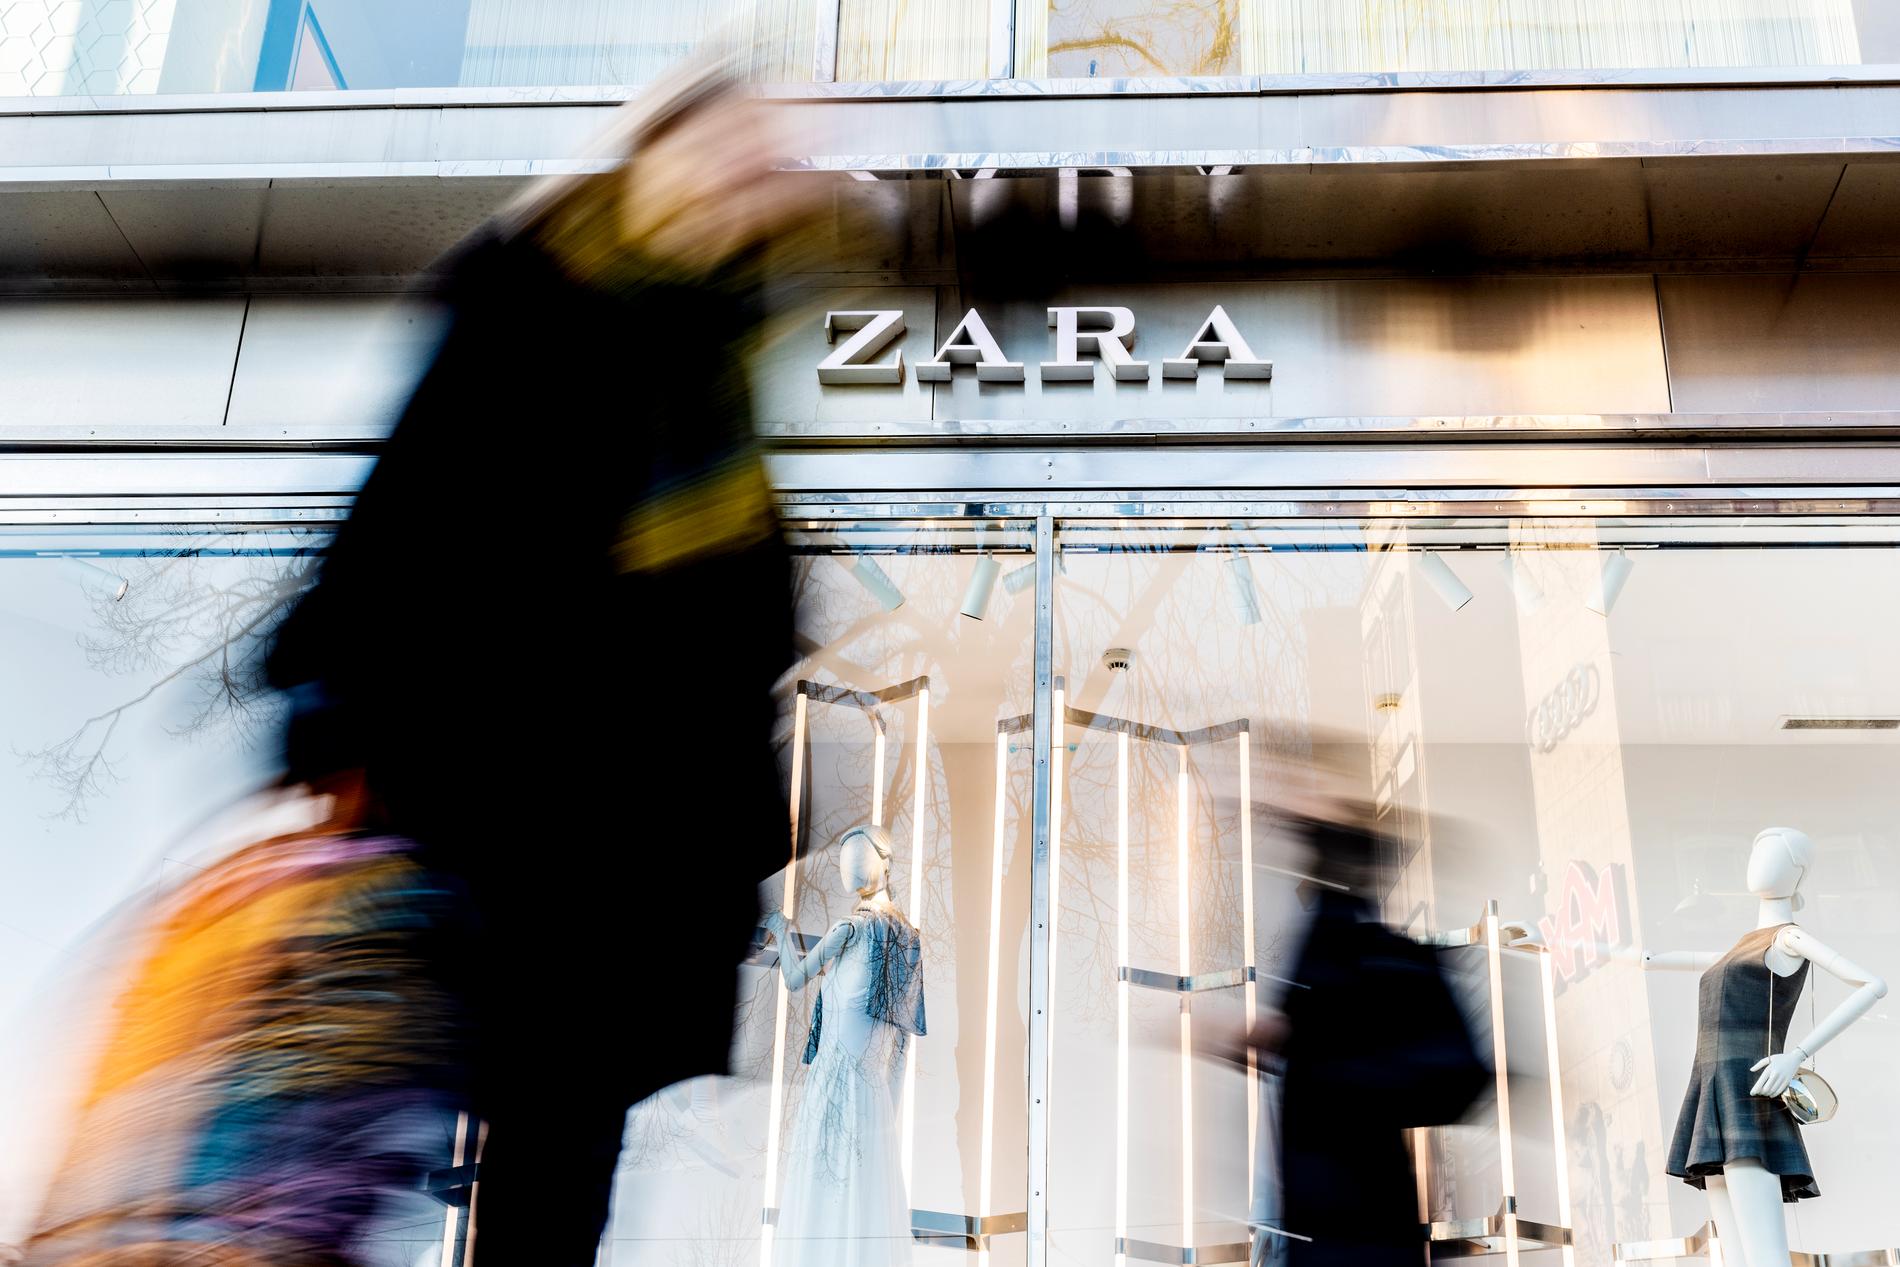  After the investigation of Zara, Aftonbladet has received numerous testimonies about the working environment.